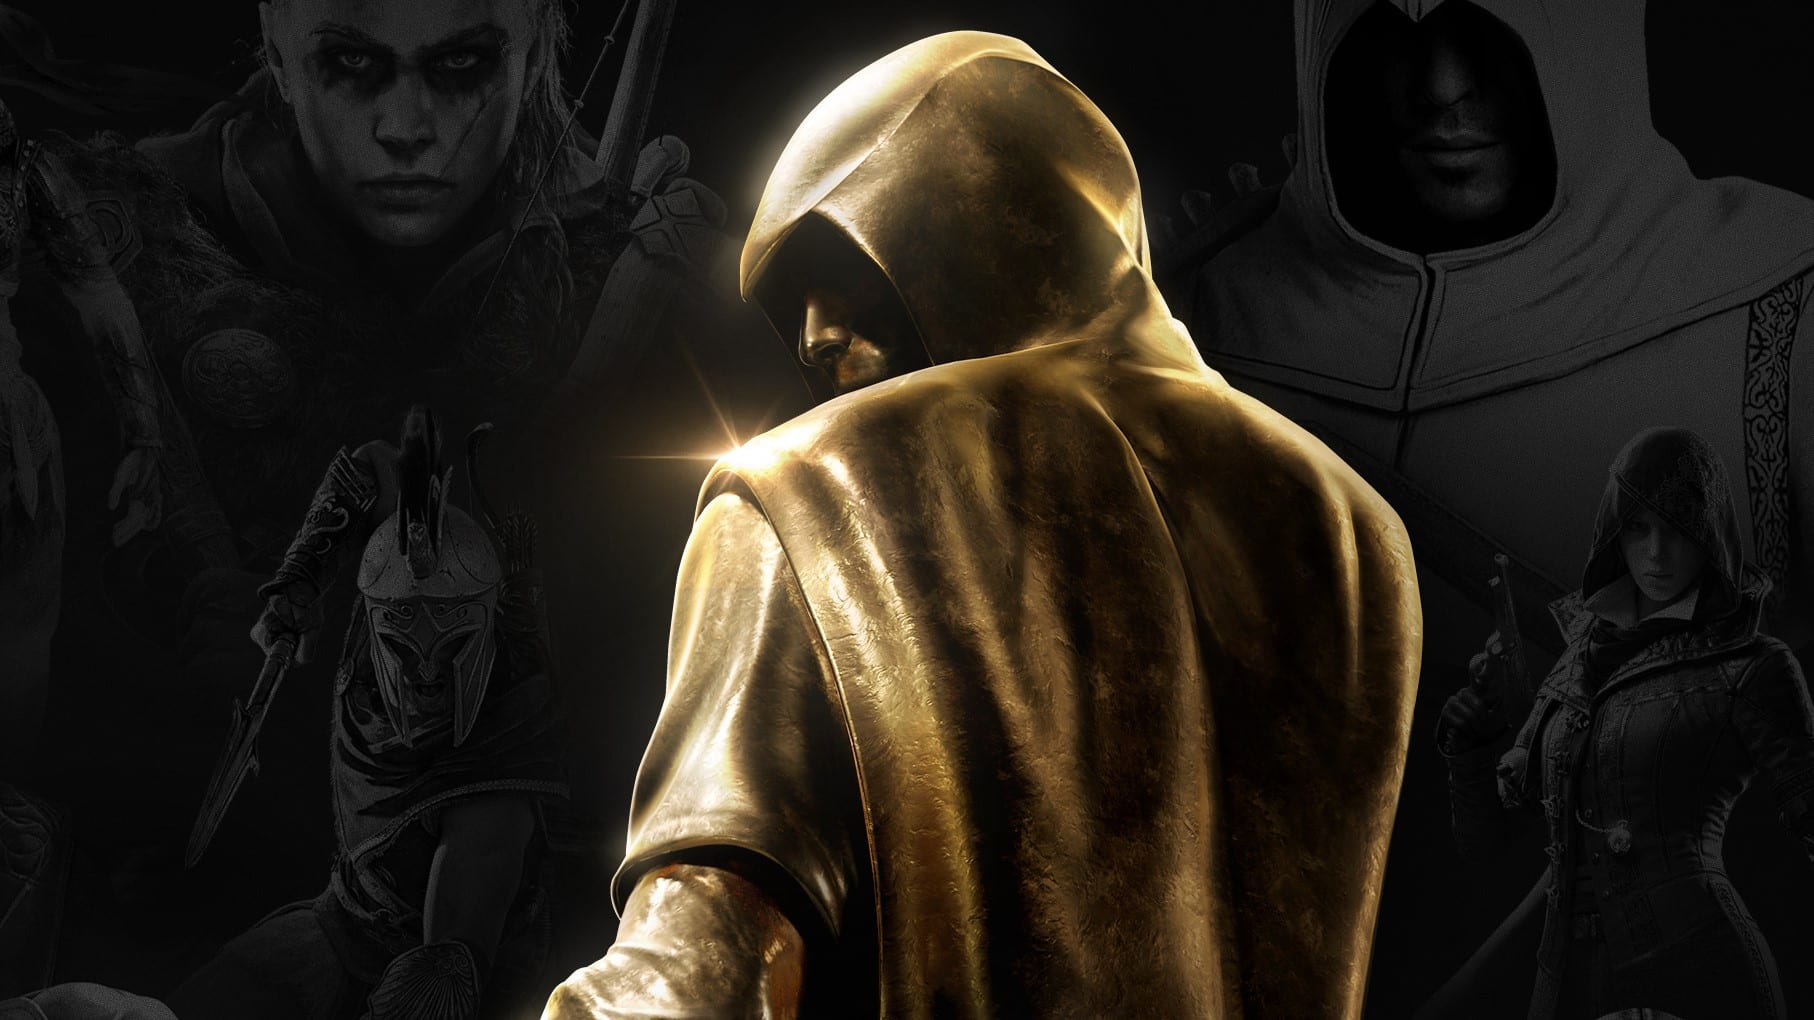 Next 'Assassin's Creed' Game Setting Will Be Revealed in Special Stream  That's Happening Now